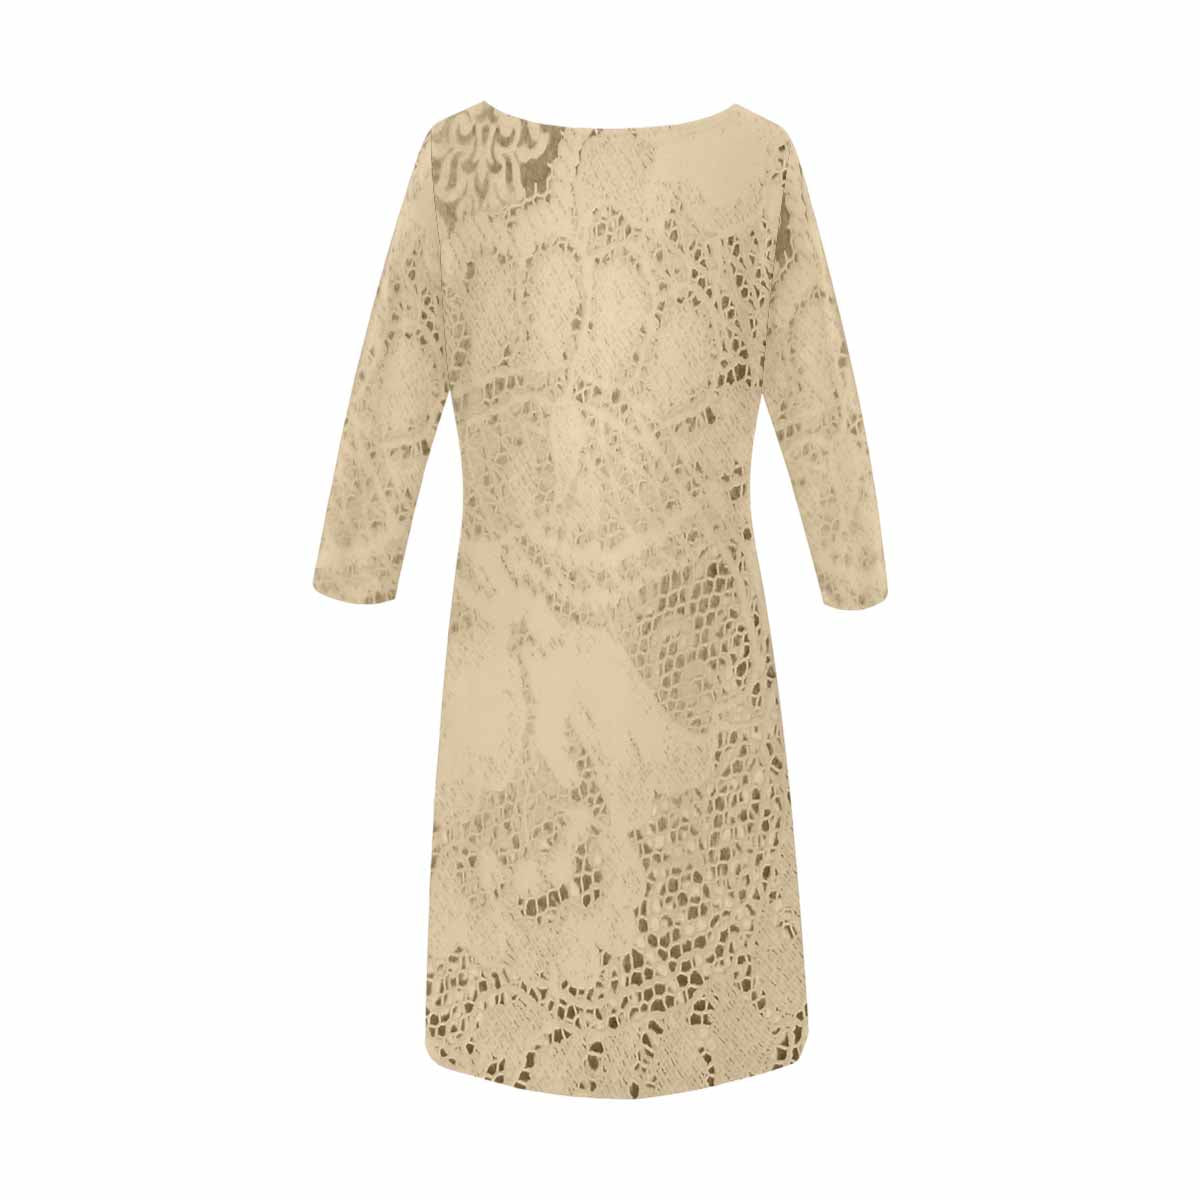 Victorian printed lace loose dress, Design 26